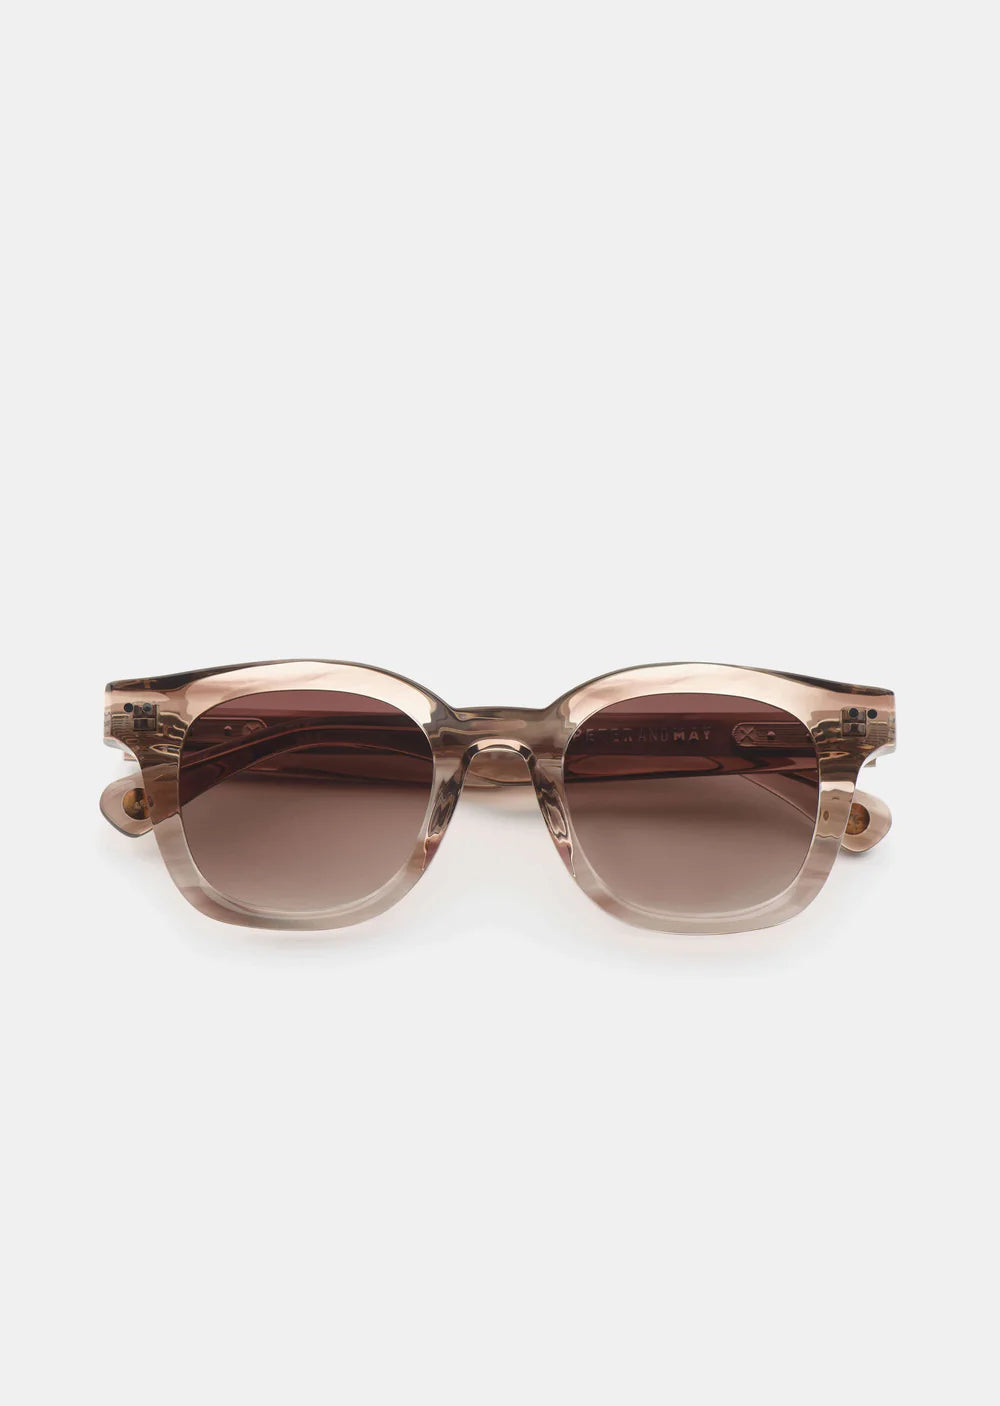 Lunette de soleil Peter and May S80 LILY OF THE VALLEY SUN BEIGE FADE BROWN